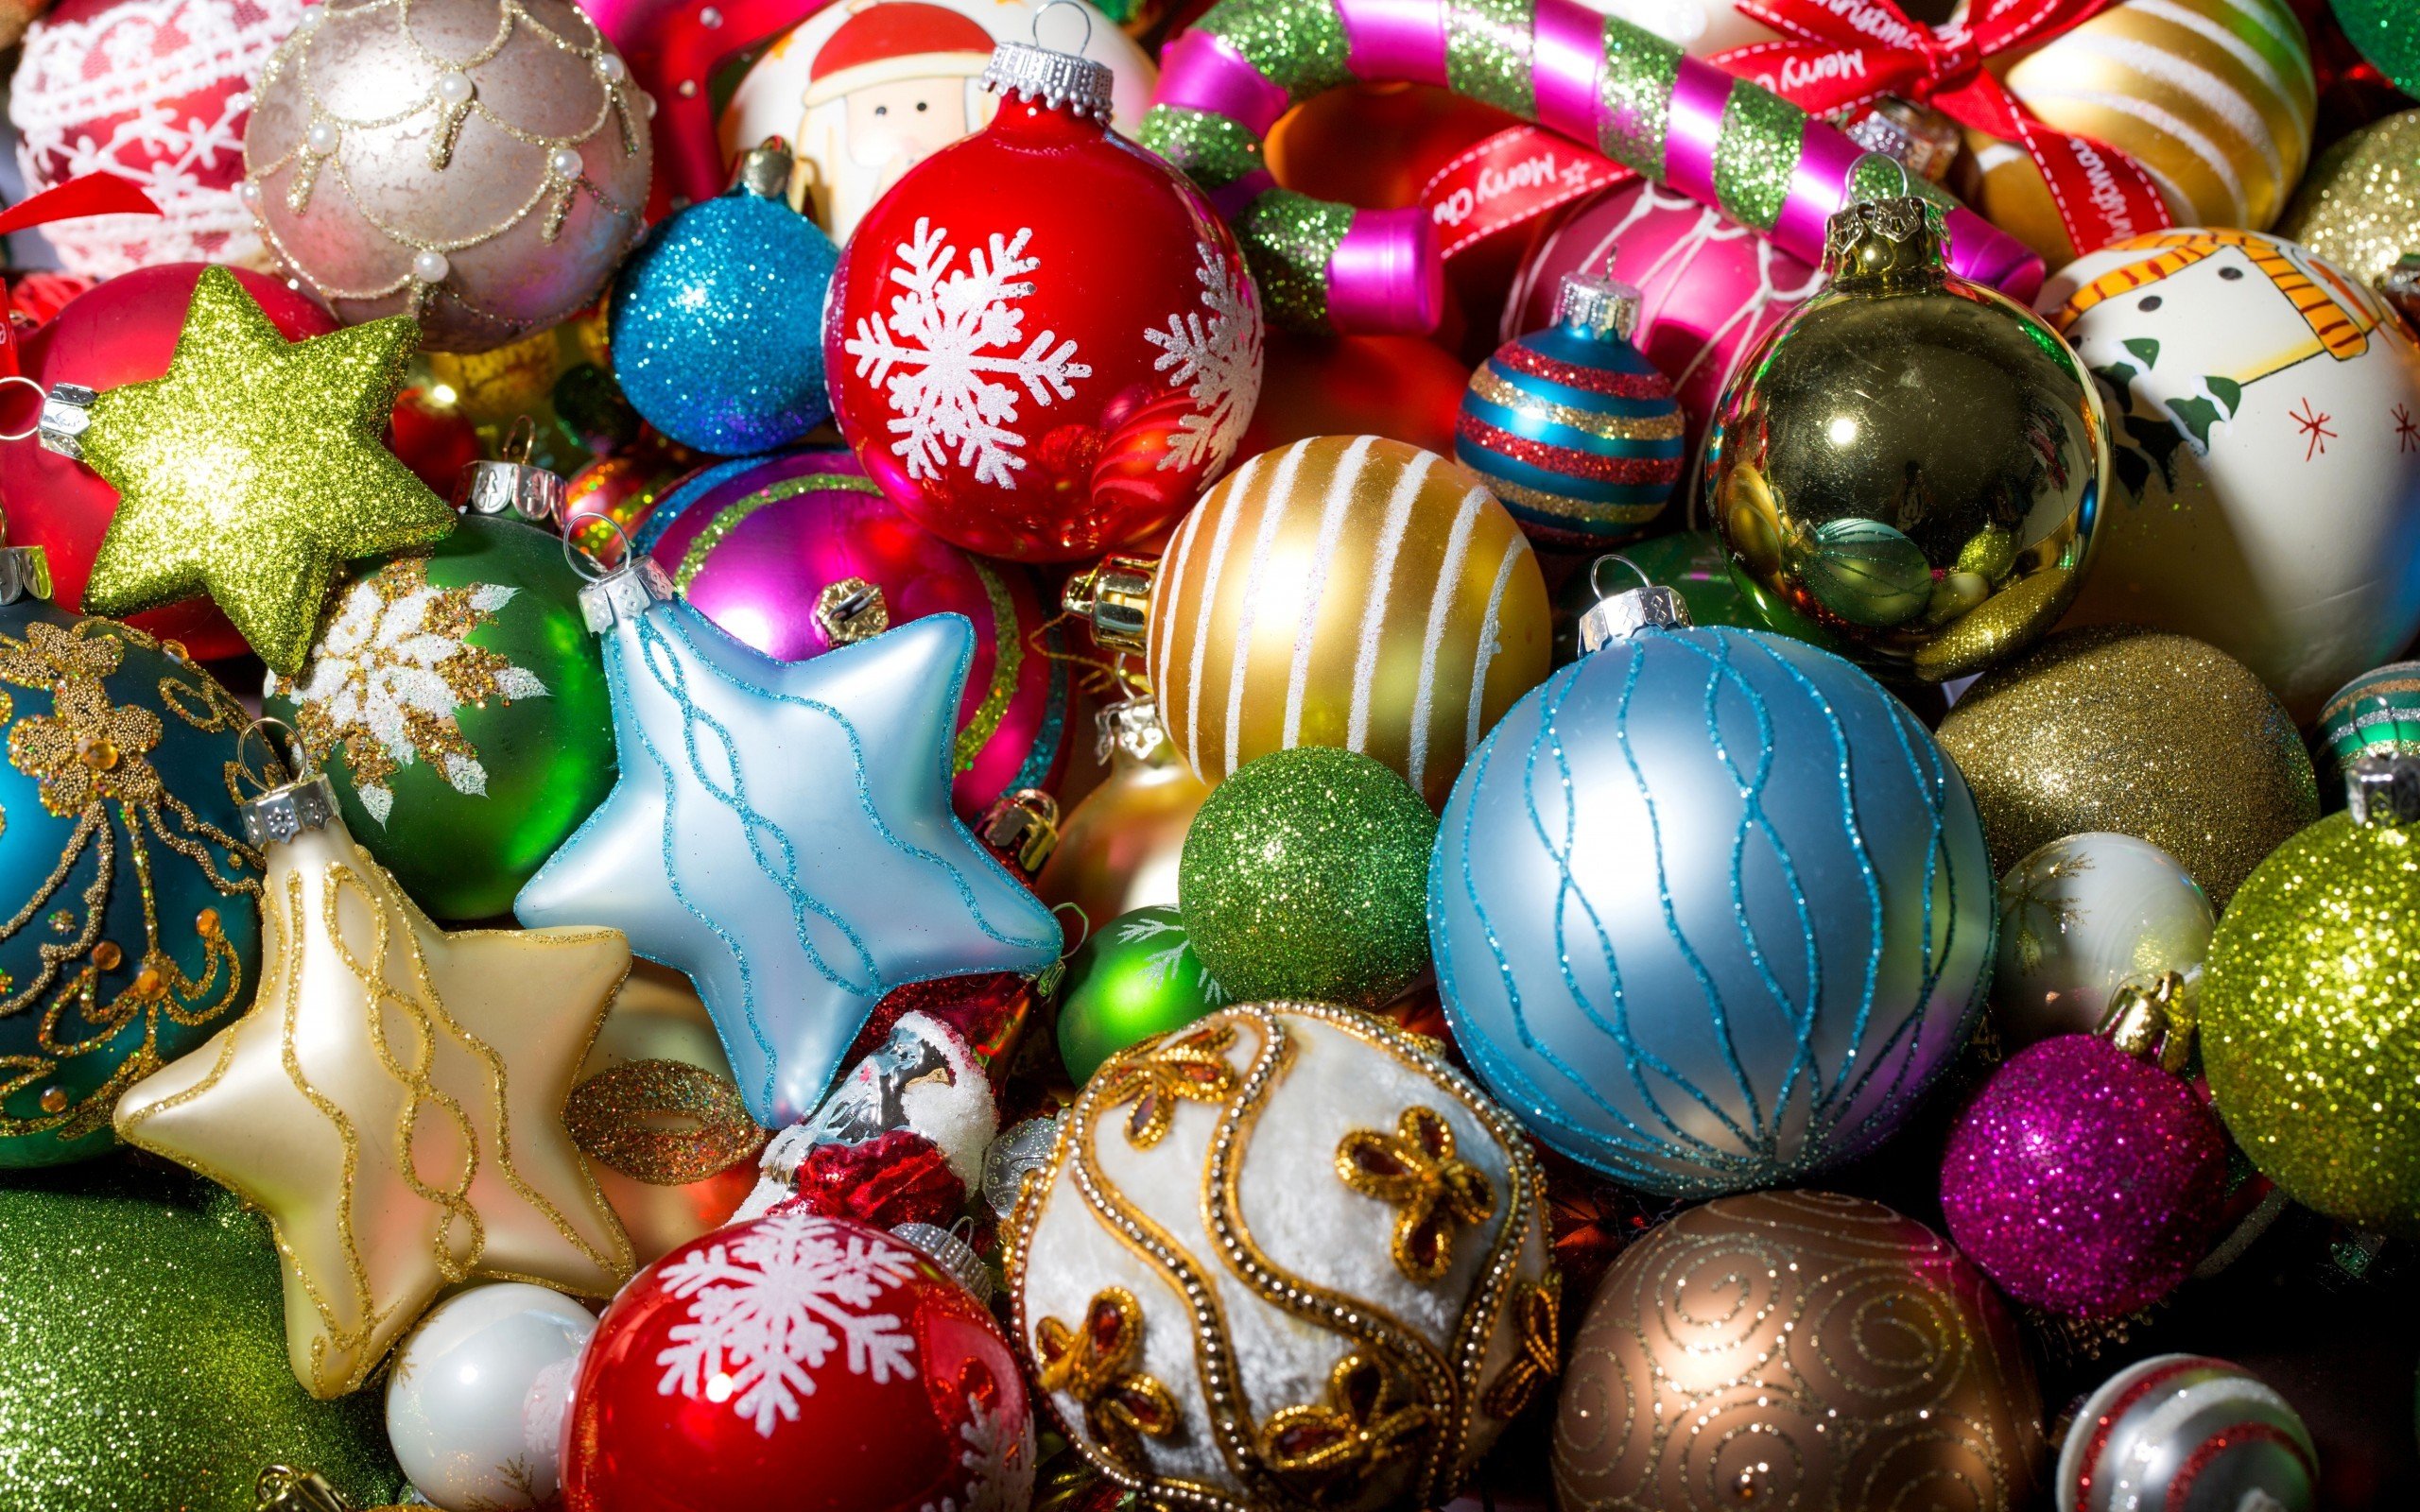 New Year, Snow, Christmas ornaments, Decorations Wallpaper